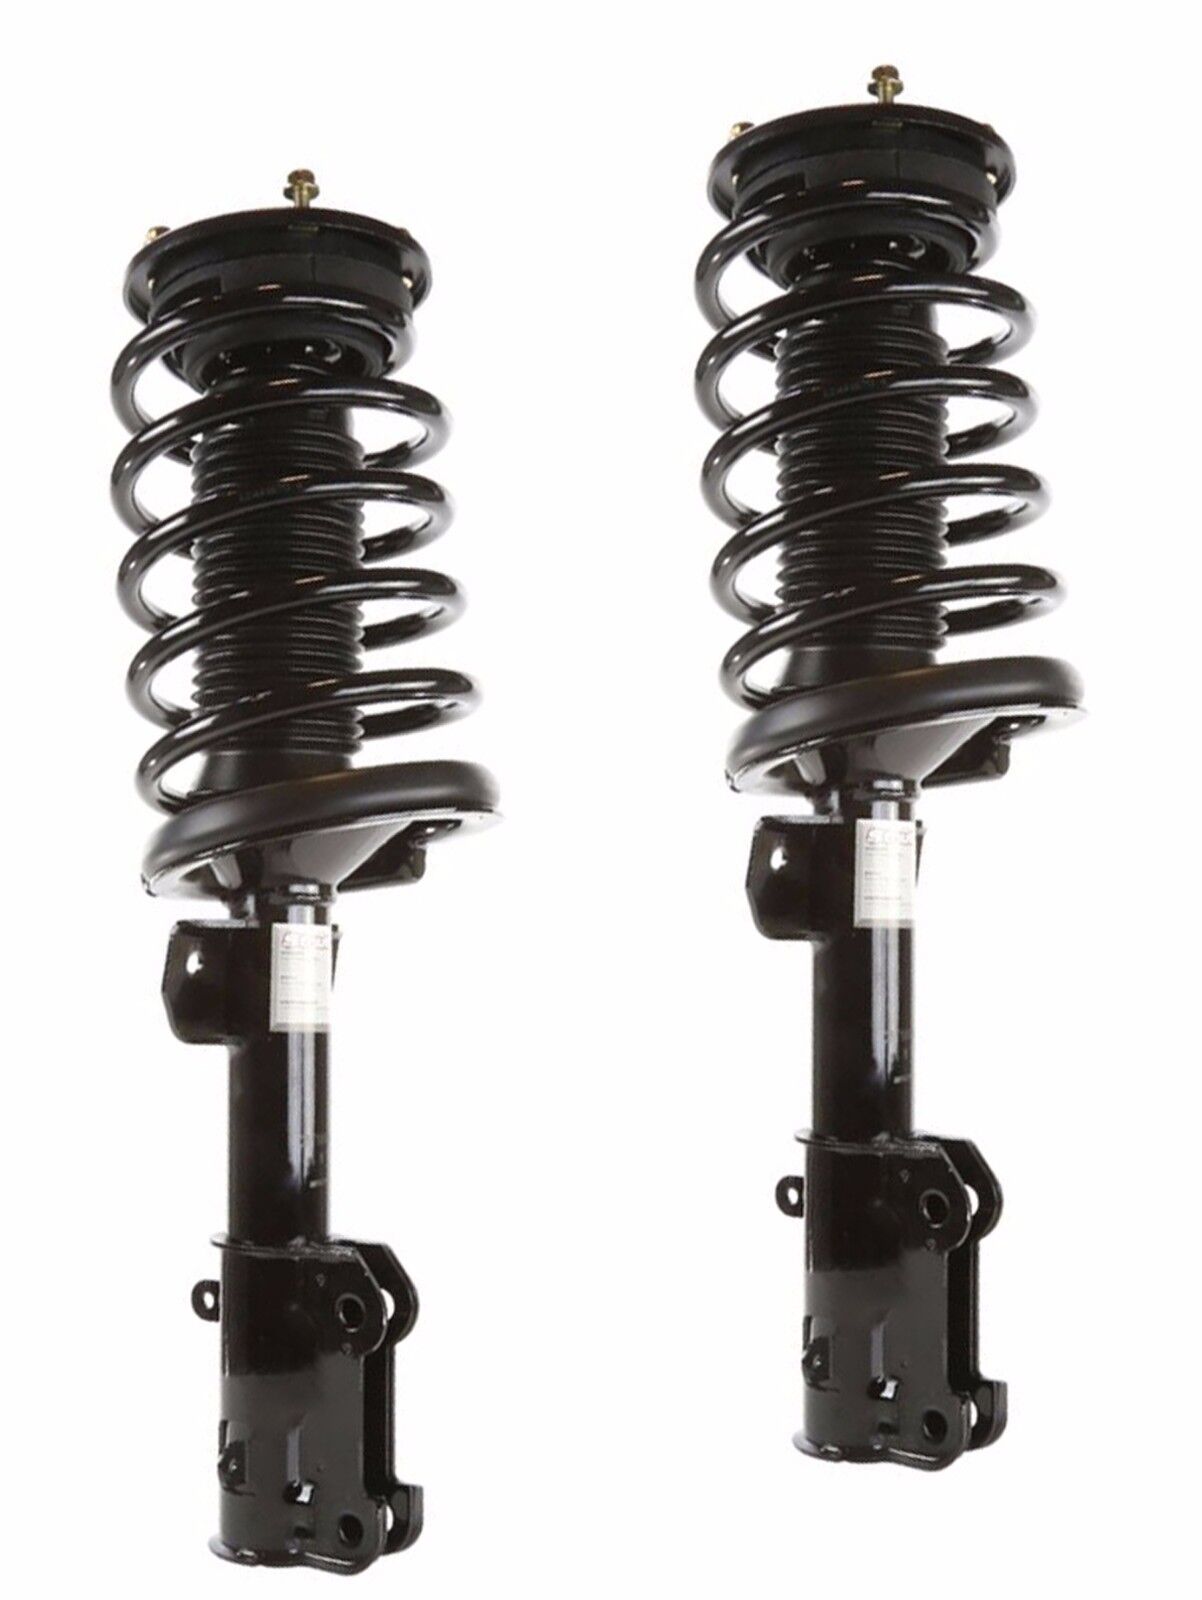 Pair: 1 New Front Complete Strut With Spring Mount Fit 2005-2010 Ford Mustang